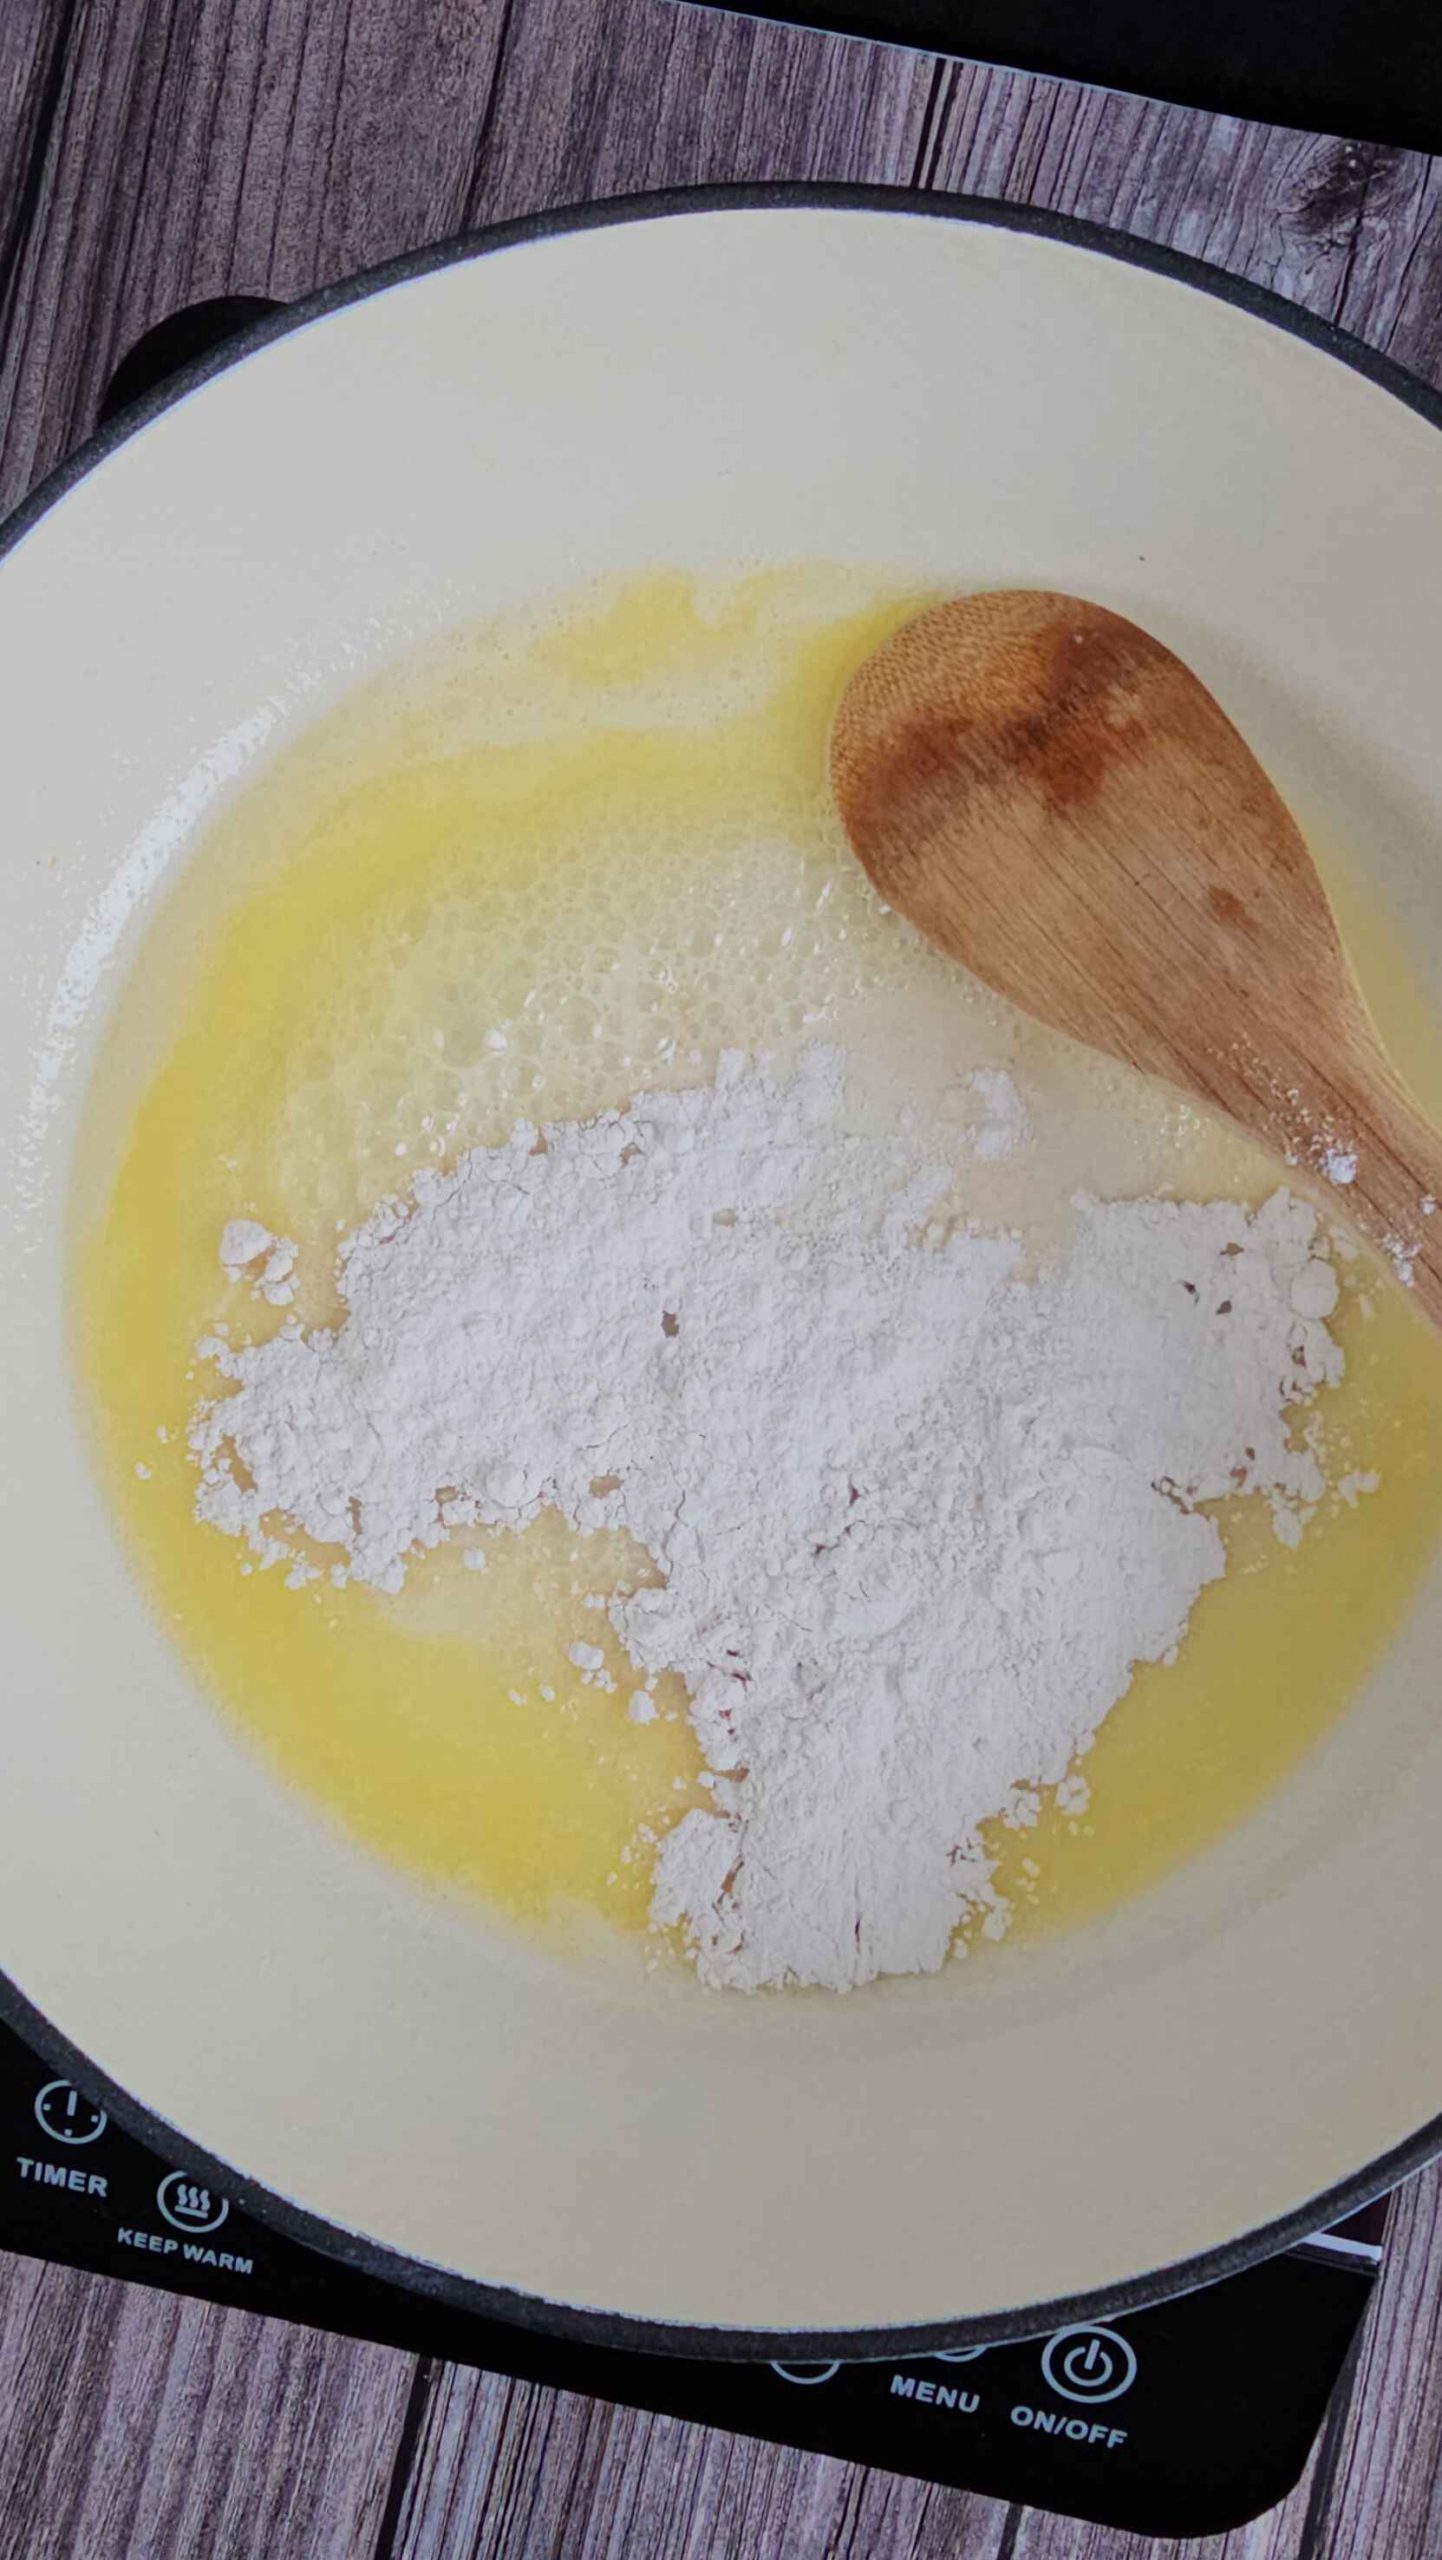 ADD THE FLOUR TO CREATE A ROUX